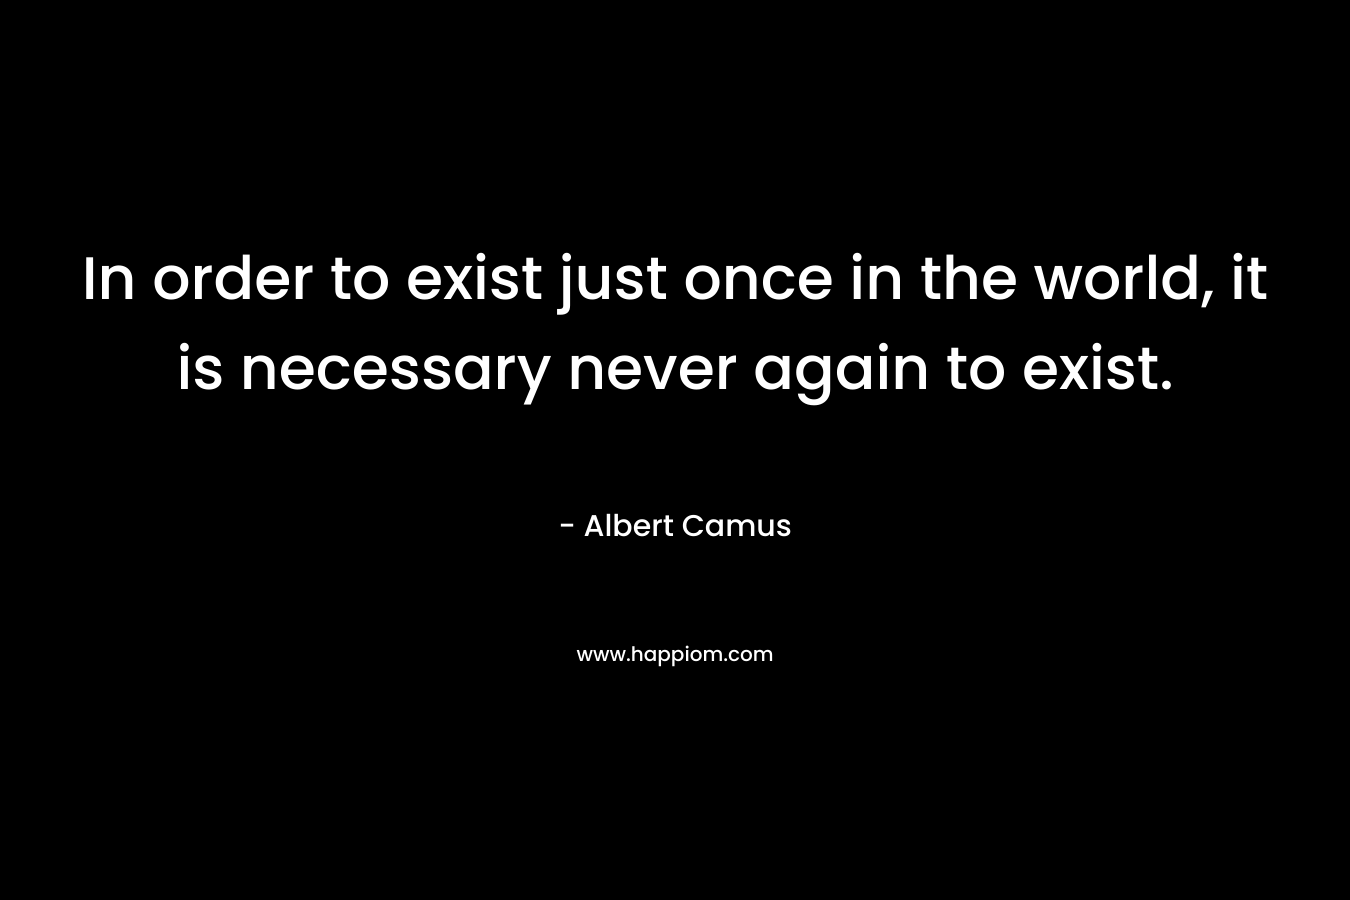 In order to exist just once in the world, it is necessary never again to exist.